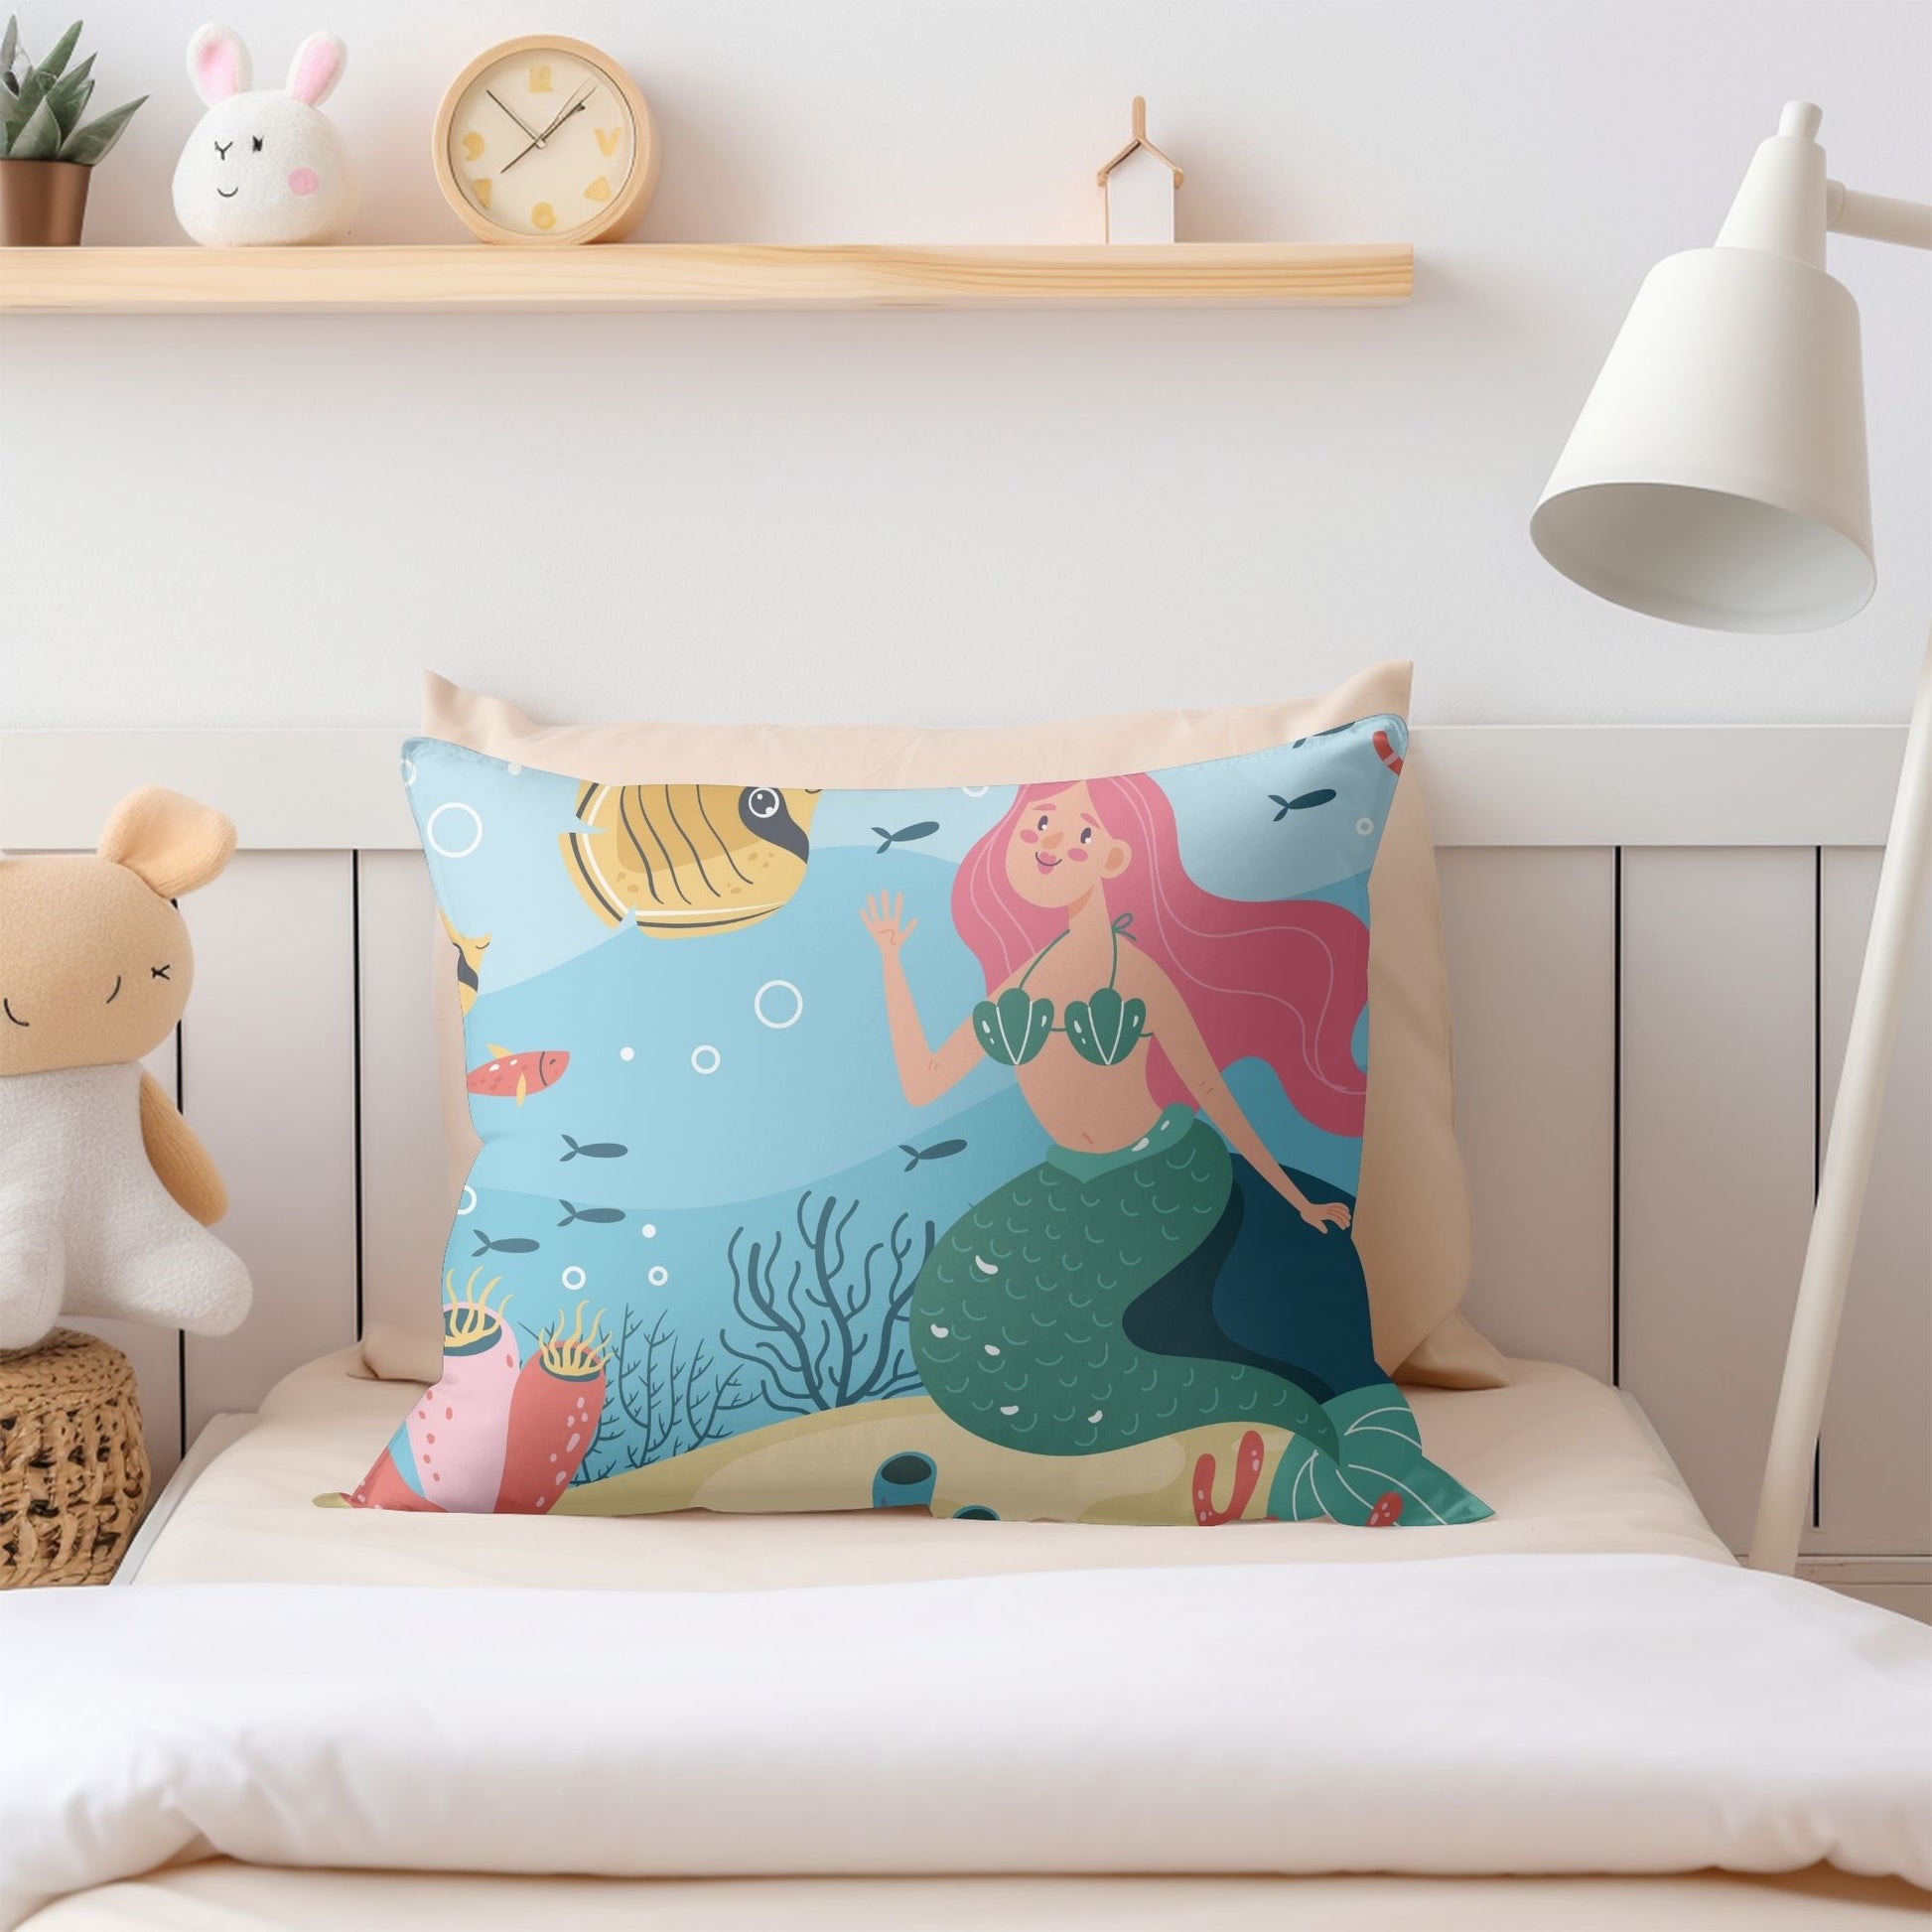 Dreamy mermaid printed pillow for a touch of fantasy in girls' rooms.